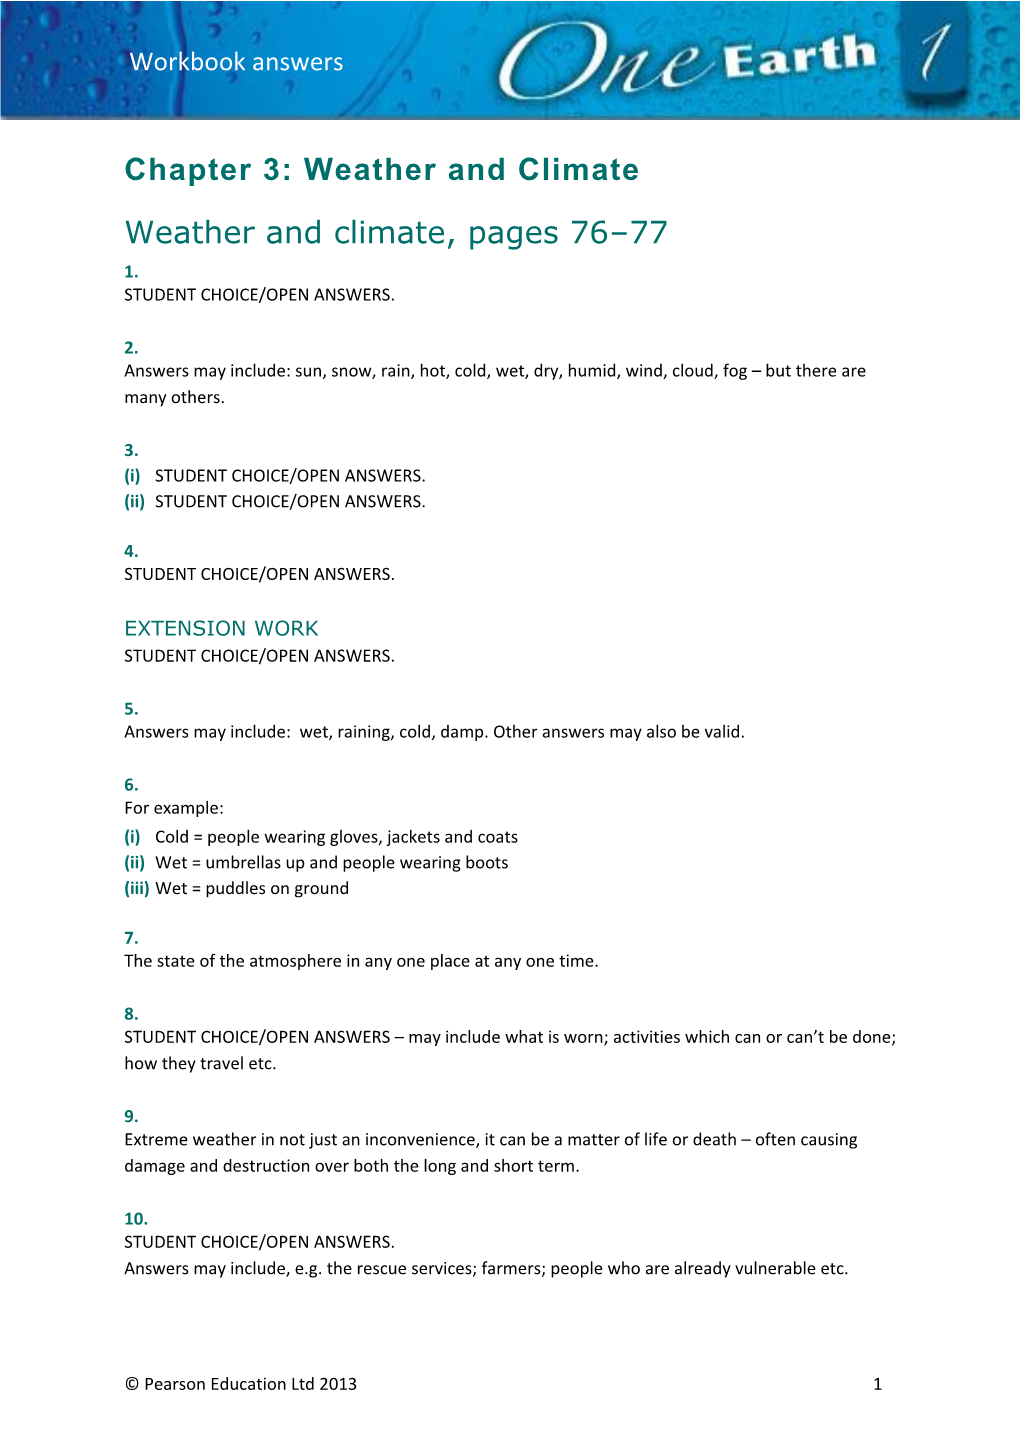 Chapter 3: Weather and Climate